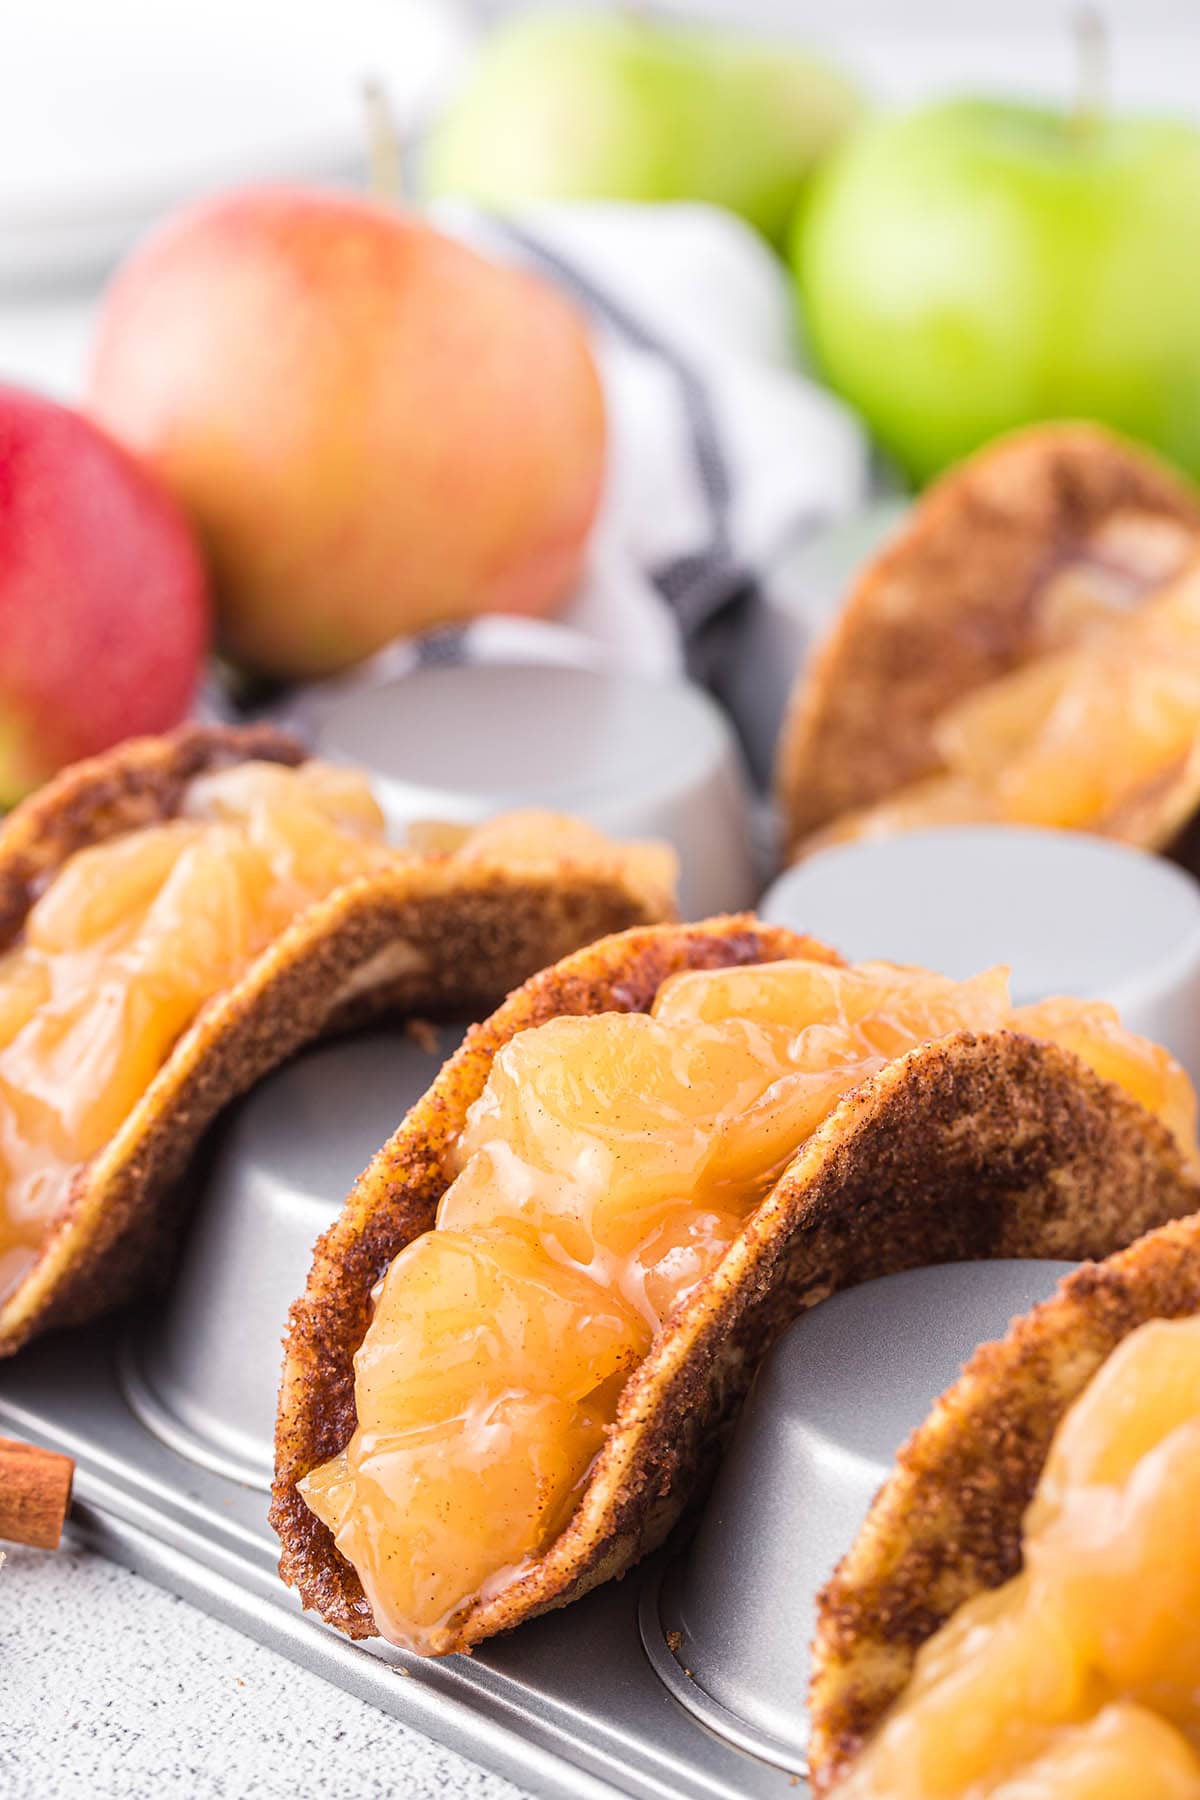 Apple Pie Tacos with apple pie filling